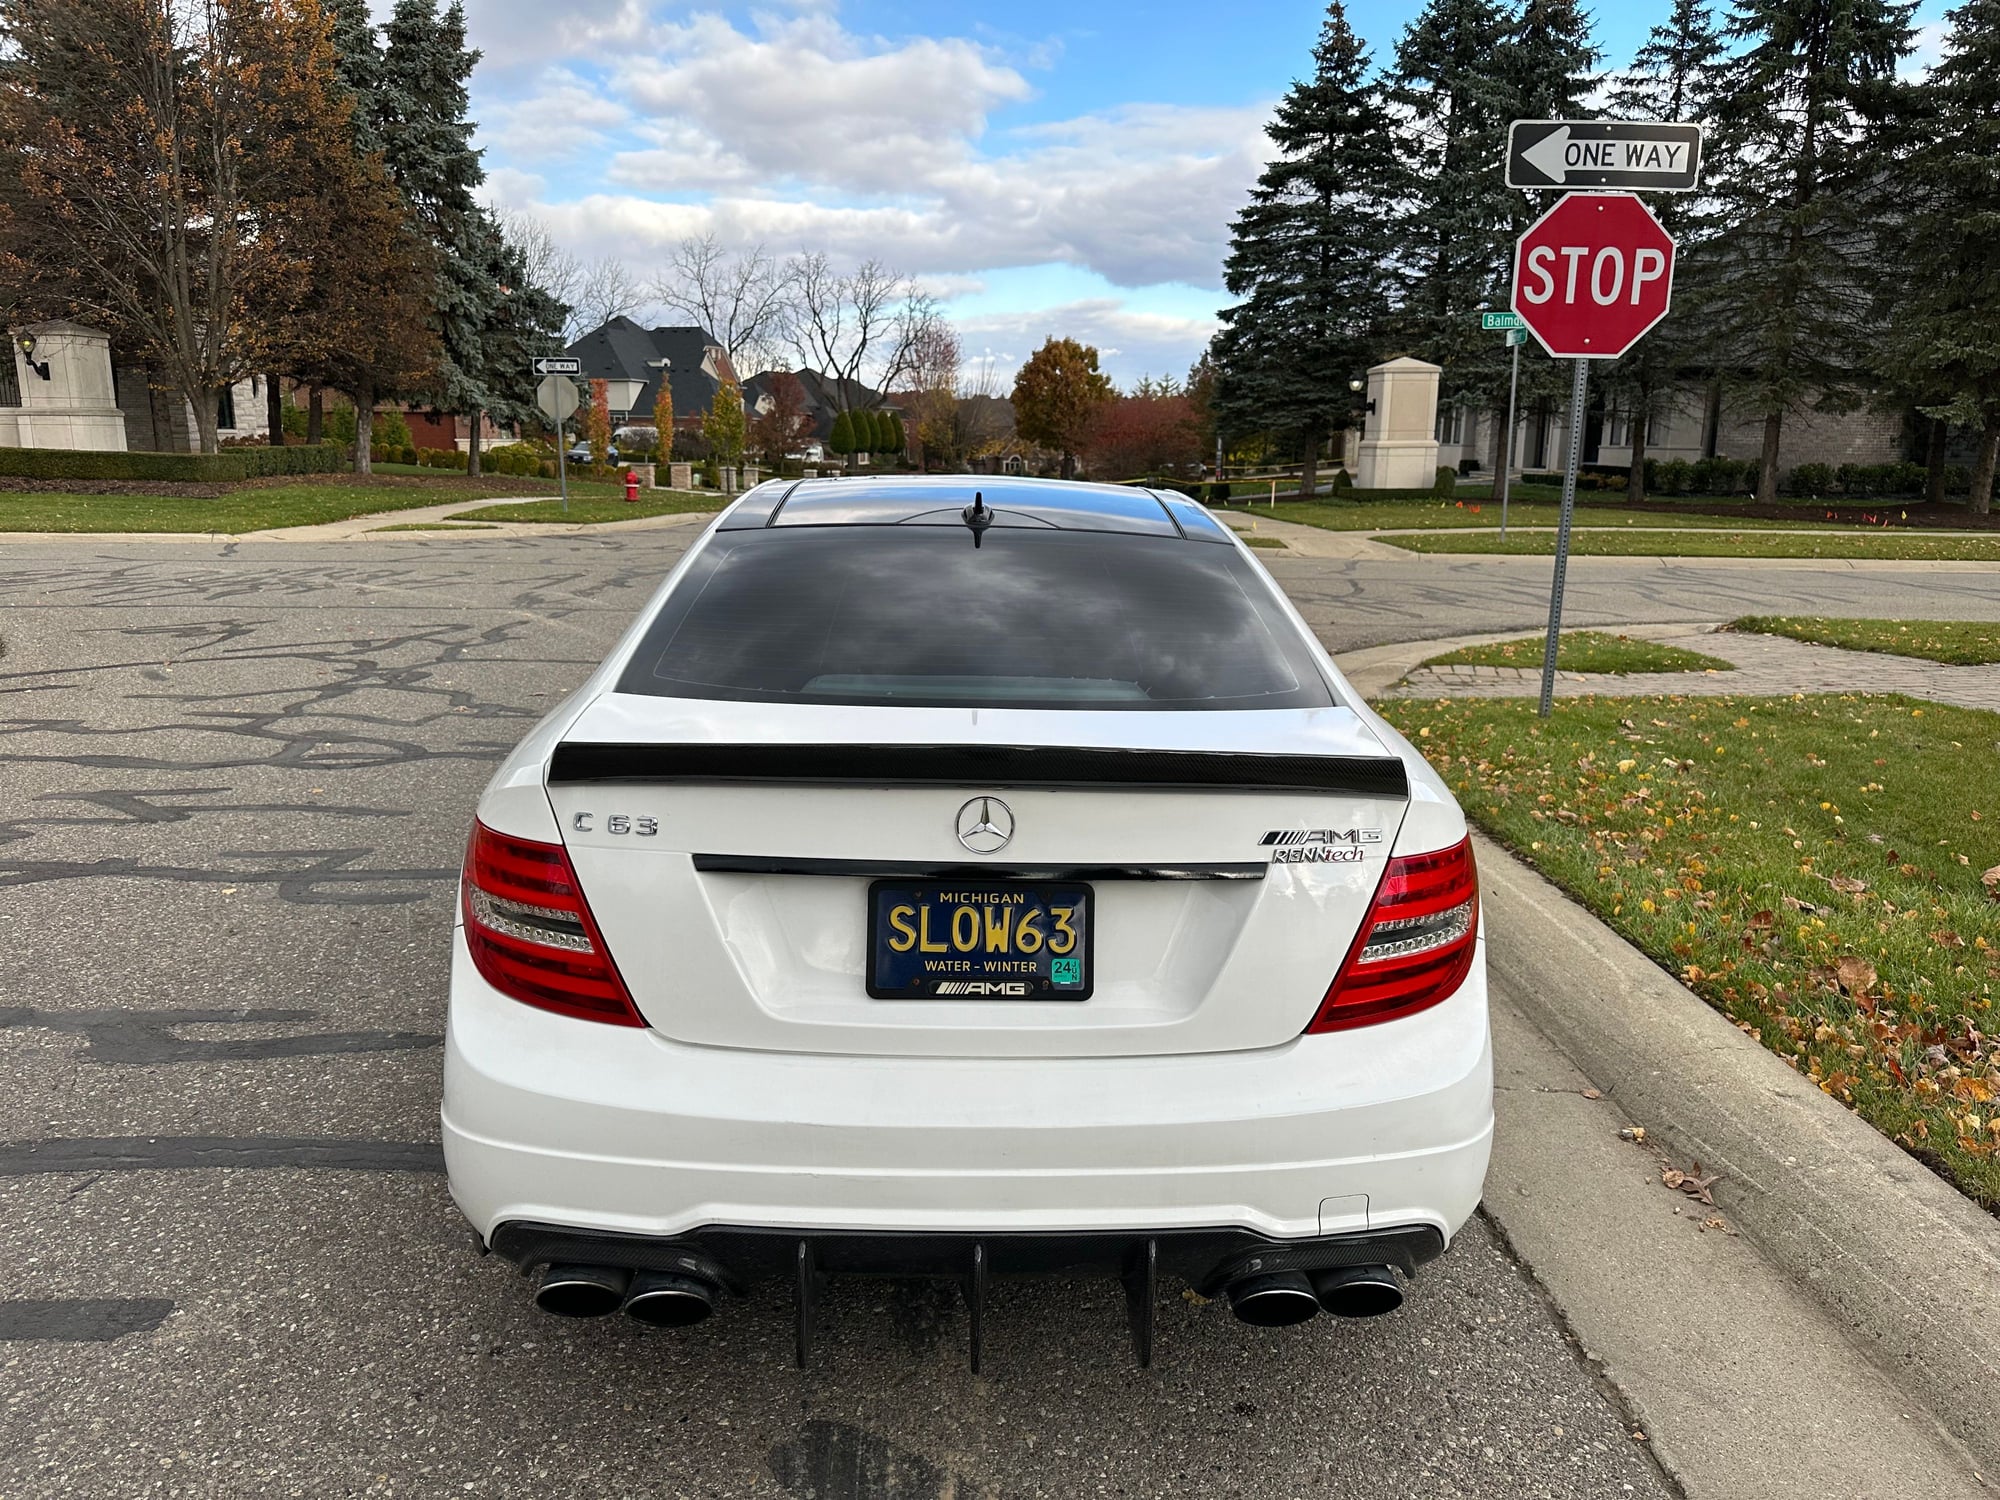 2015 Mercedes-Benz C63 AMG - 2015 Mercedes Benz c63 AMG 507 edition coupe headers &renntech tuned - Used - VIN WDDGJ7HB6FG375021 - 105,000 Miles - 8 cyl - Coupe - White - Rochester Hills, MI 48307, United States